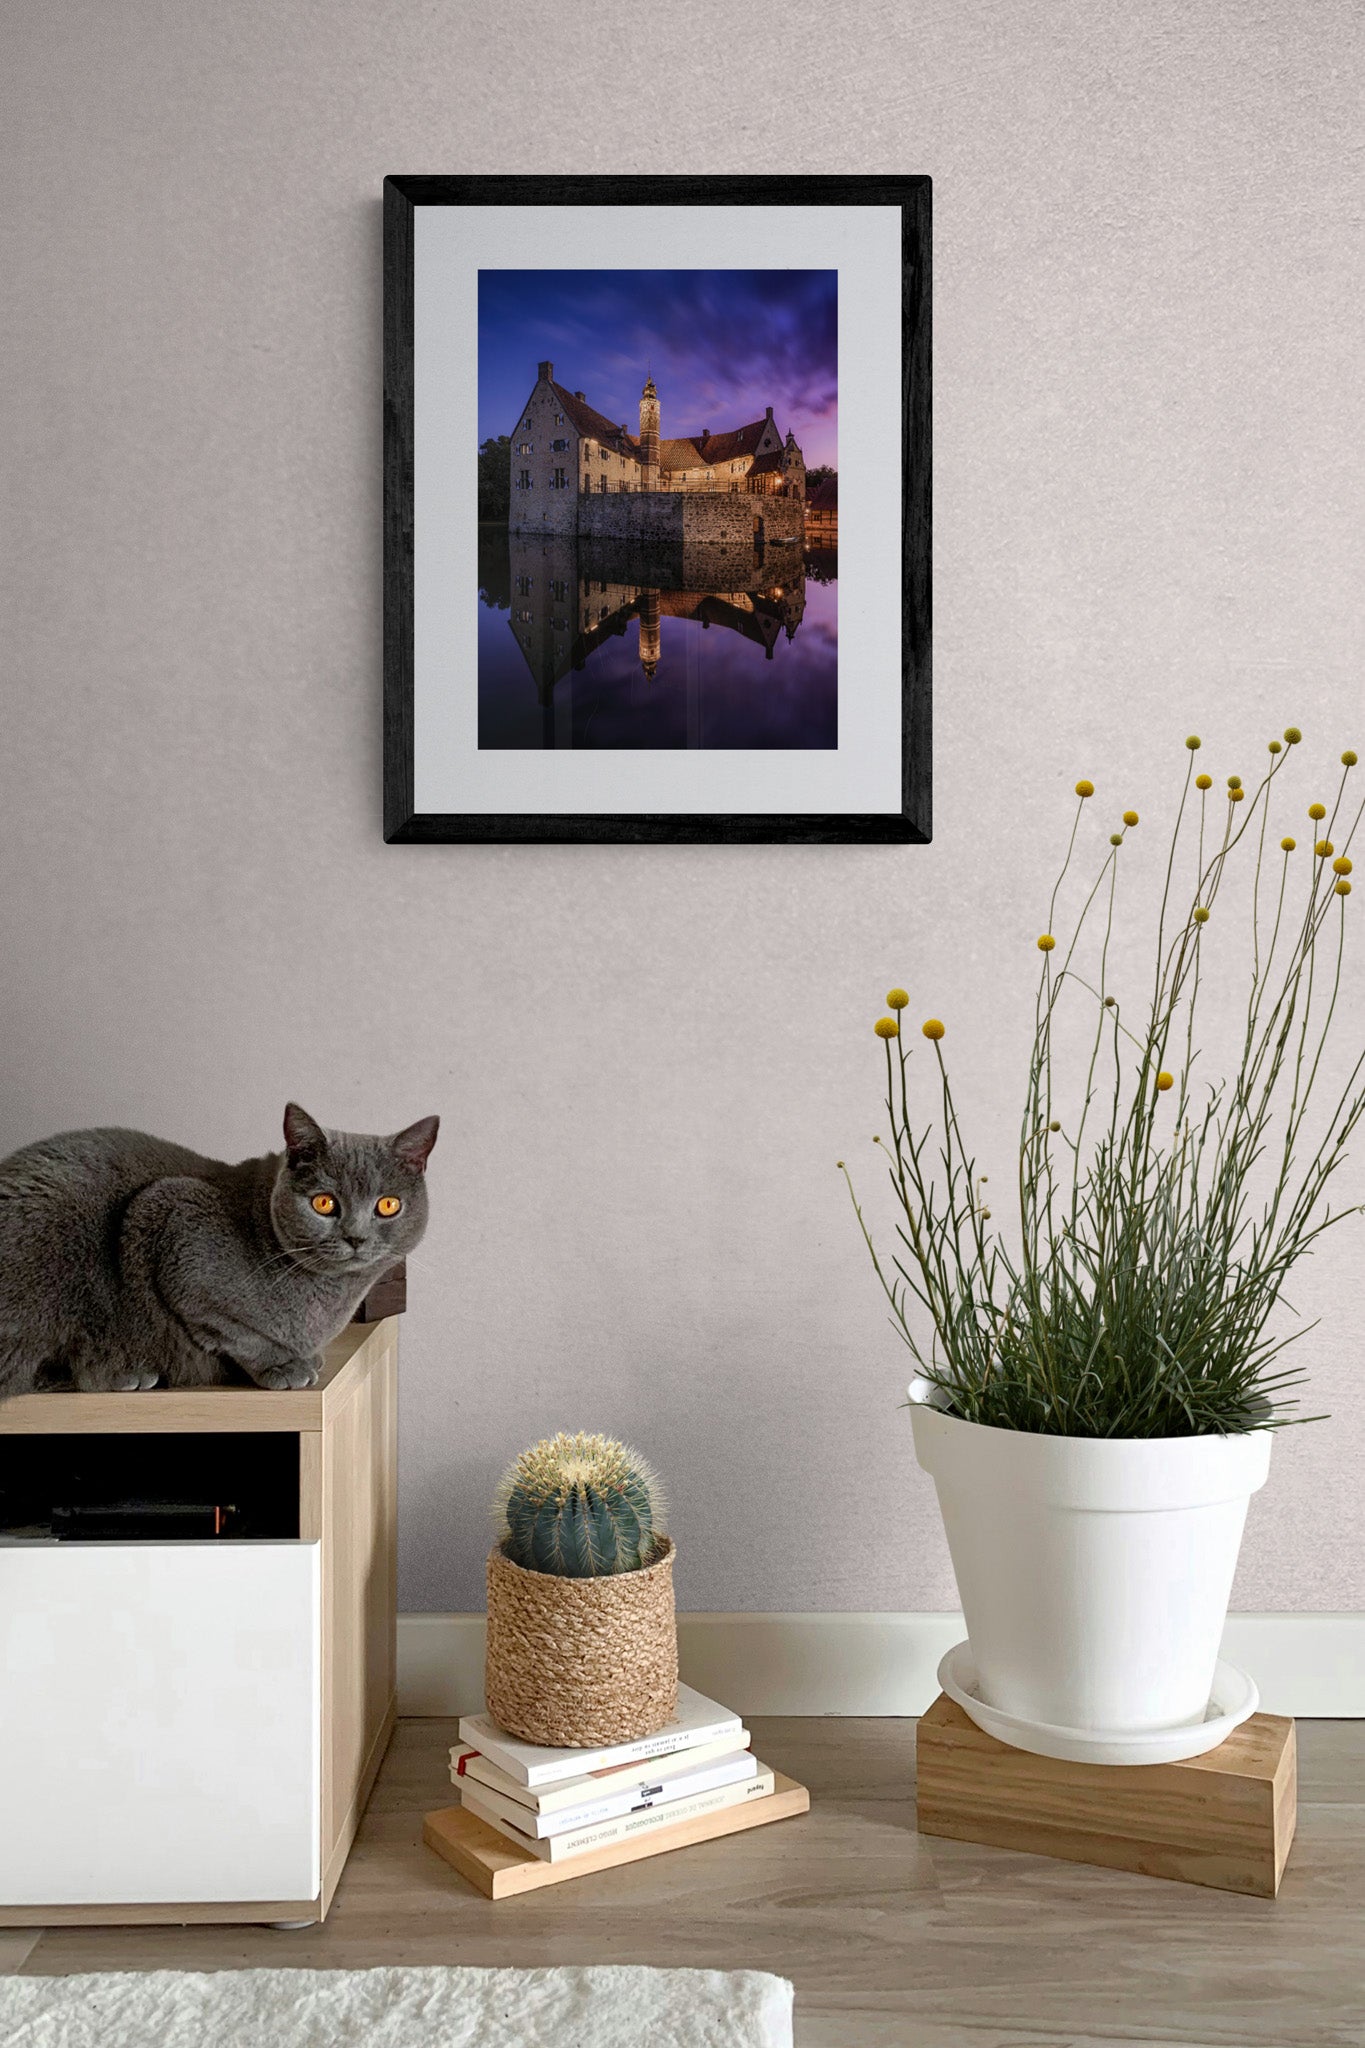 Image Title: Time flies by Photographer: Marcus Danz Location: Lüdinghausen, Germany Image description: Vischering Castle, my home town‘s medieval jewel, shines in all its beauty on this perfect summer evening shortly after sunset. High quality Fine Art print up to 36 inch / around 90 centimeters on Hahnemühle paper available. Small variant in living room.